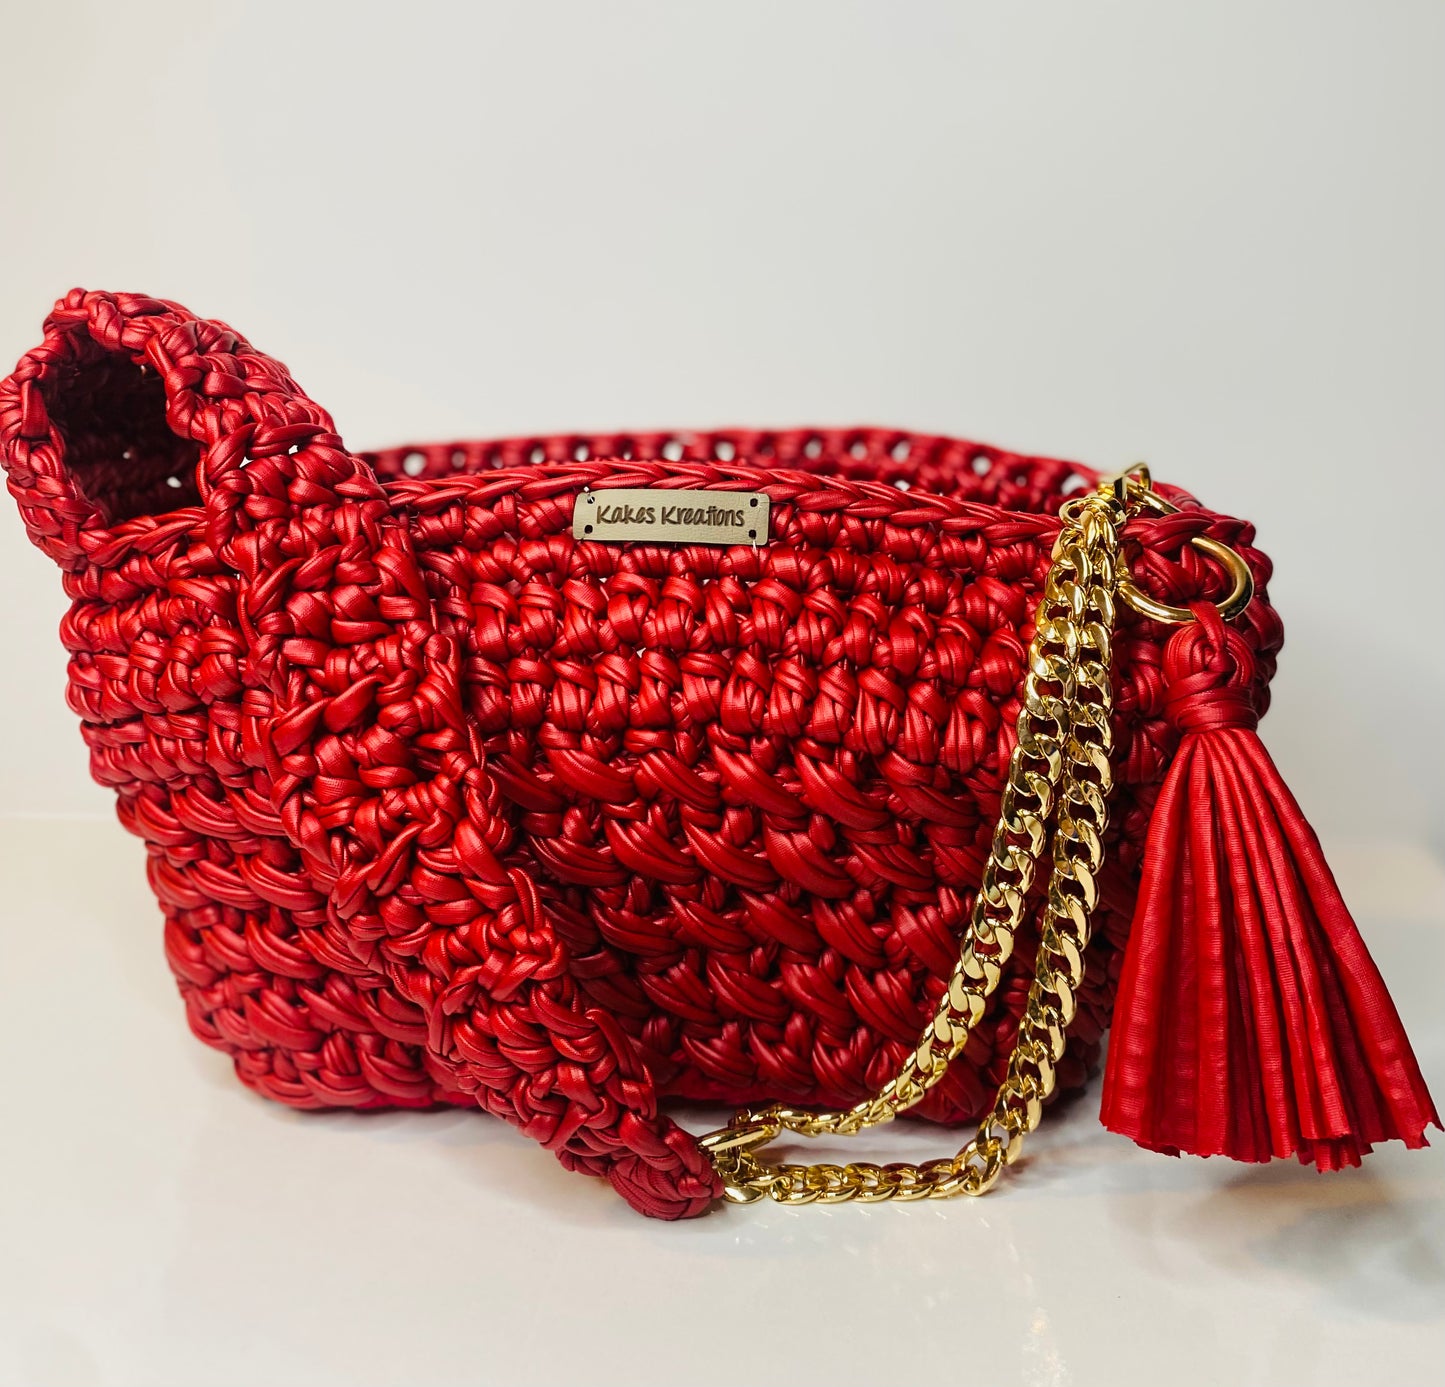 Smooth as leather, Kreations by V Luxury Crochet Handbag